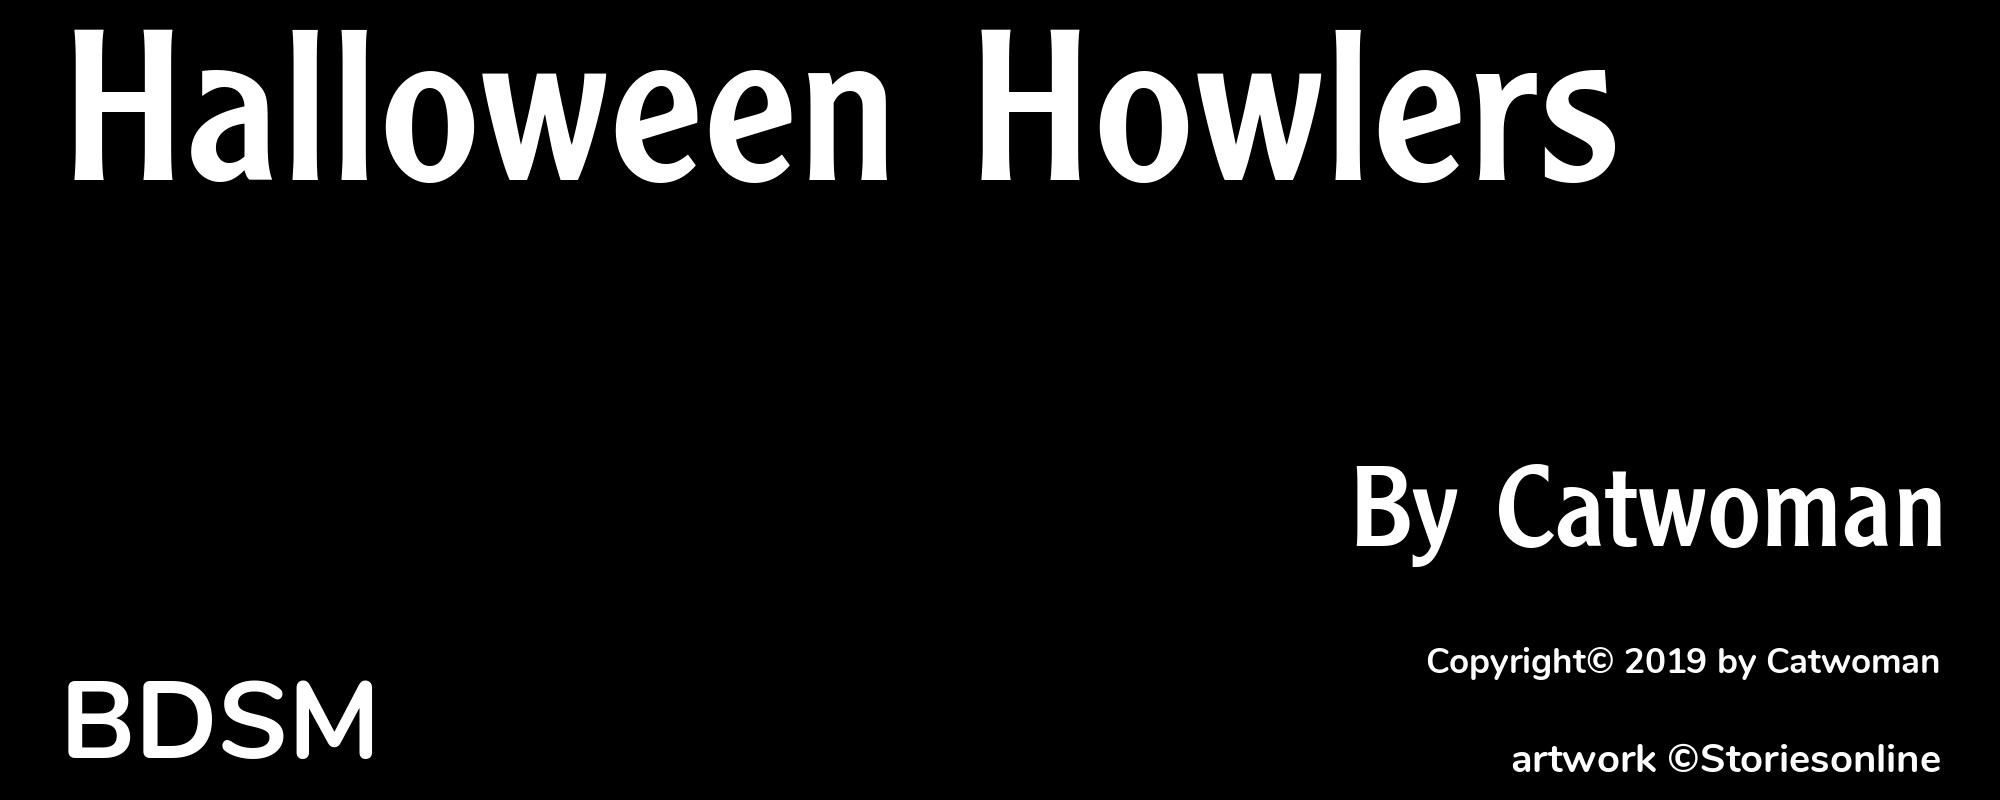 Halloween Howlers - Cover